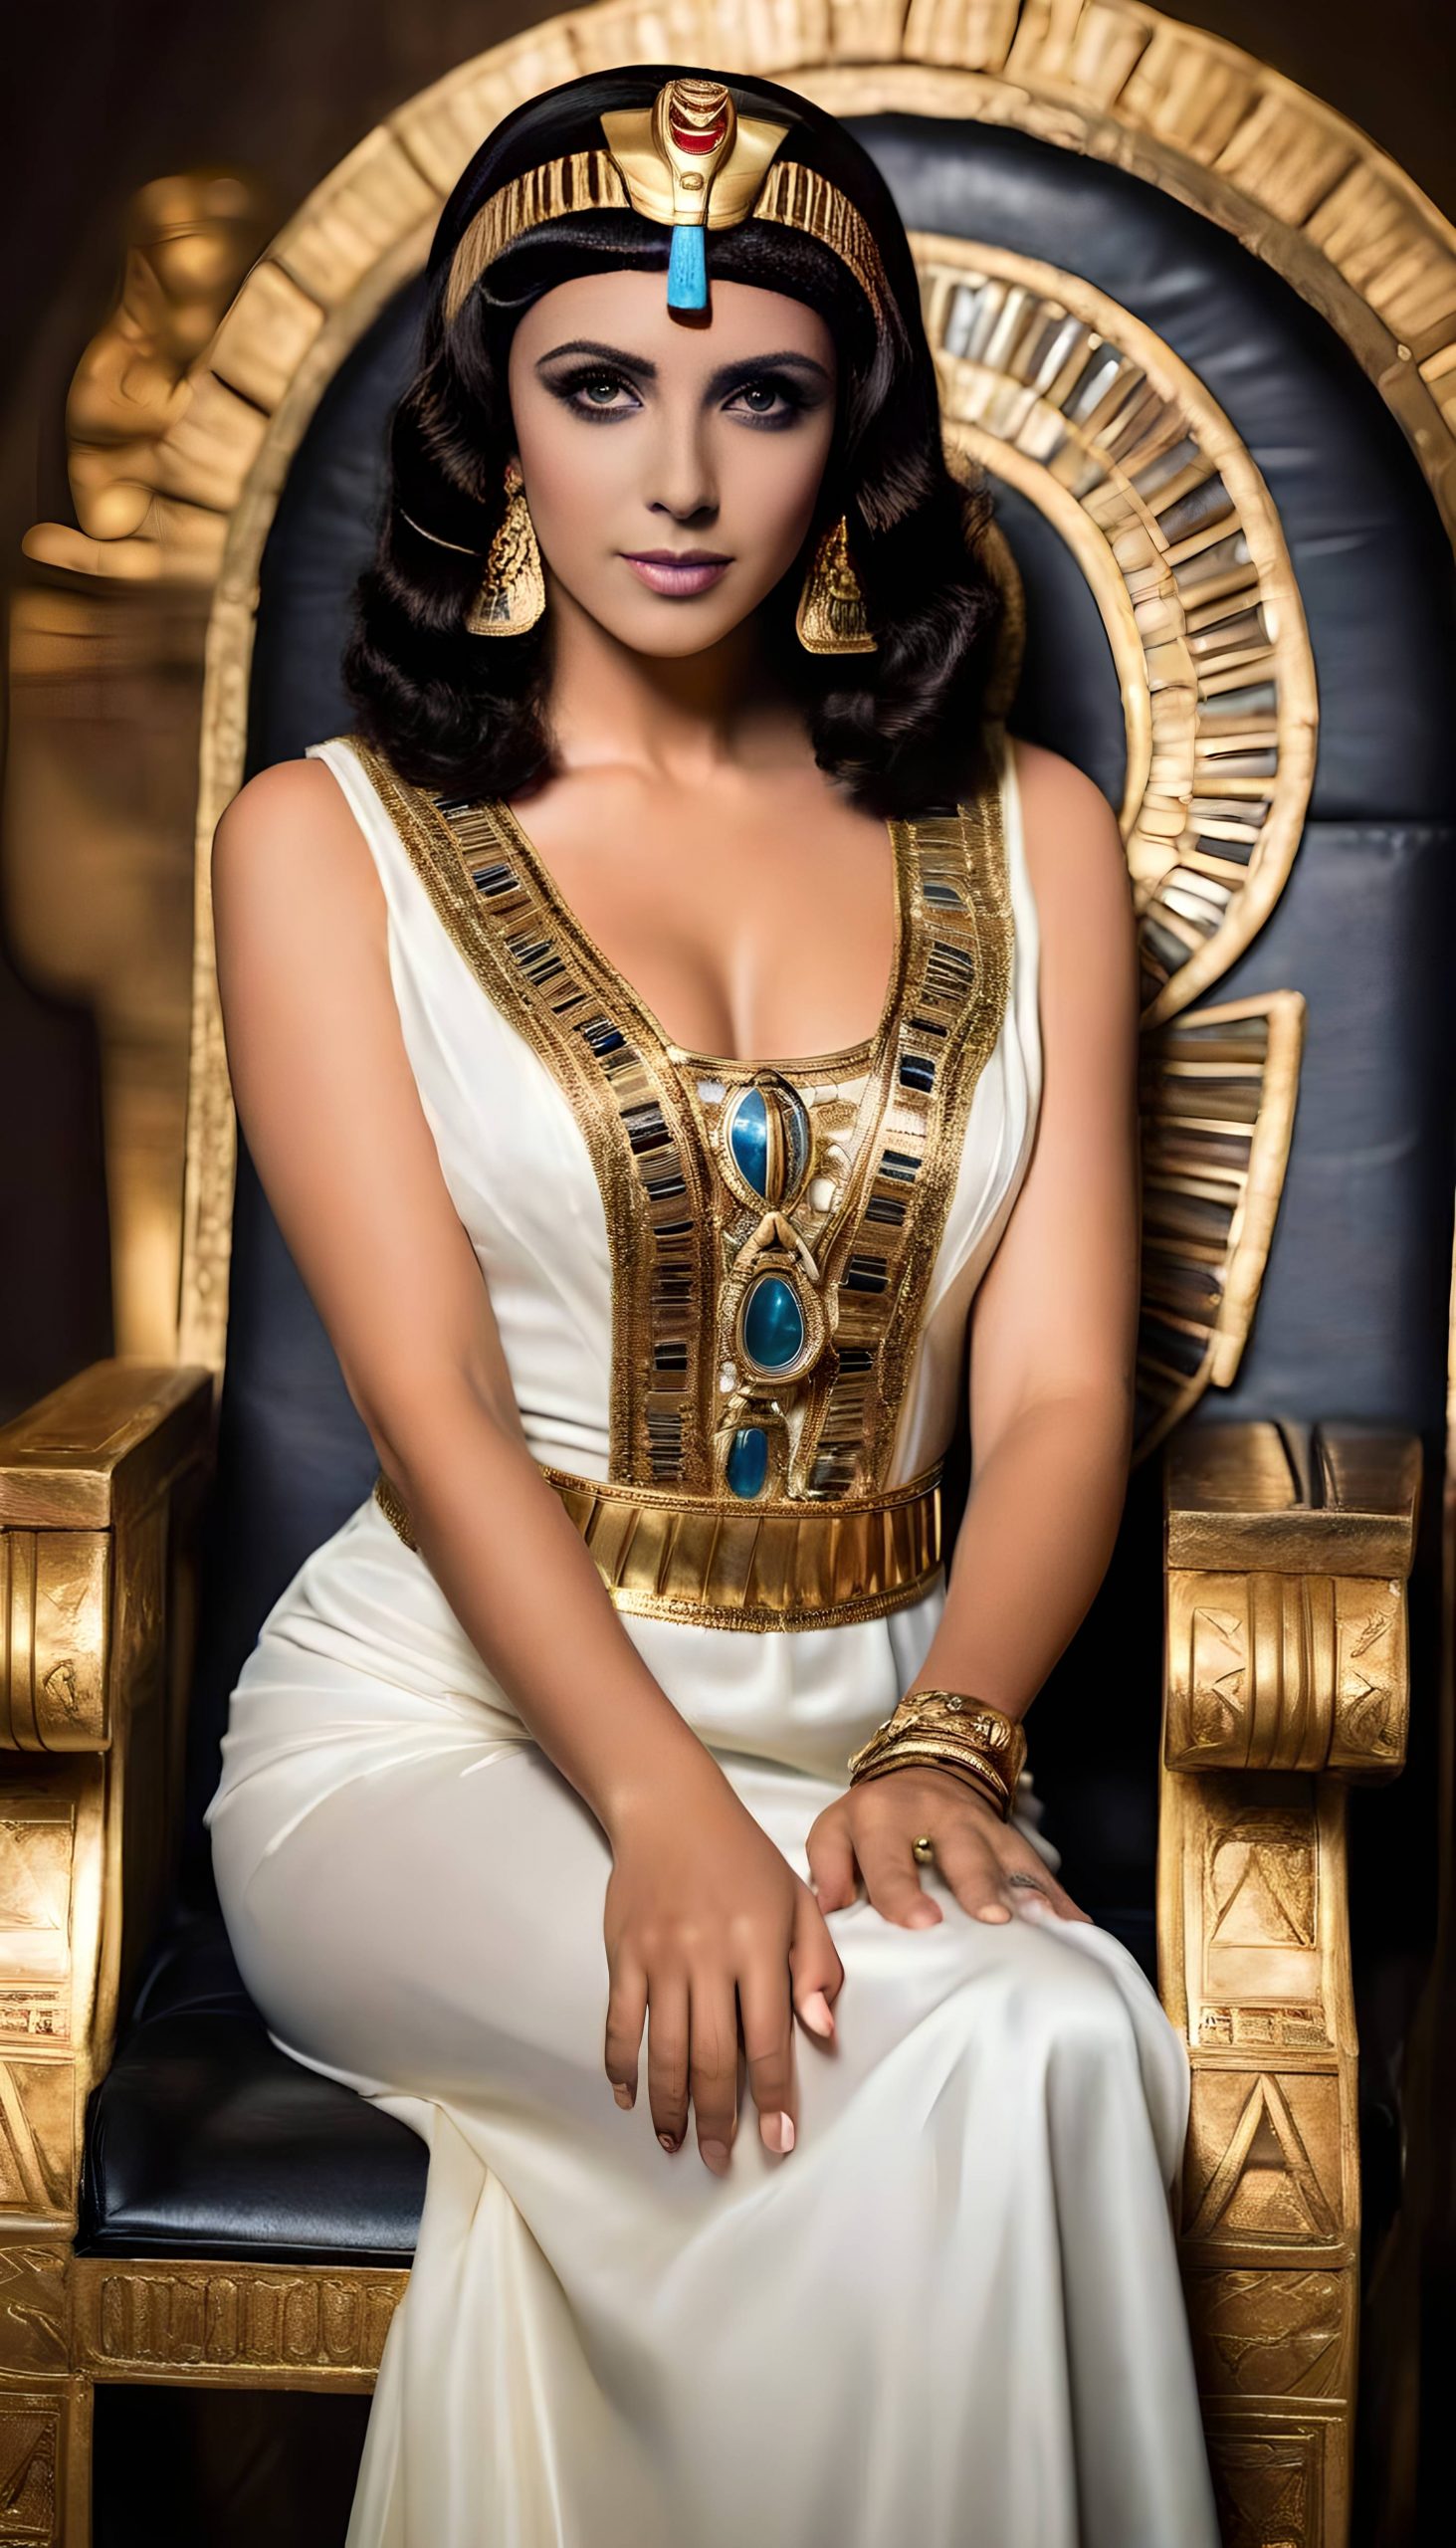 Armchair Interview with Cleopatra VII